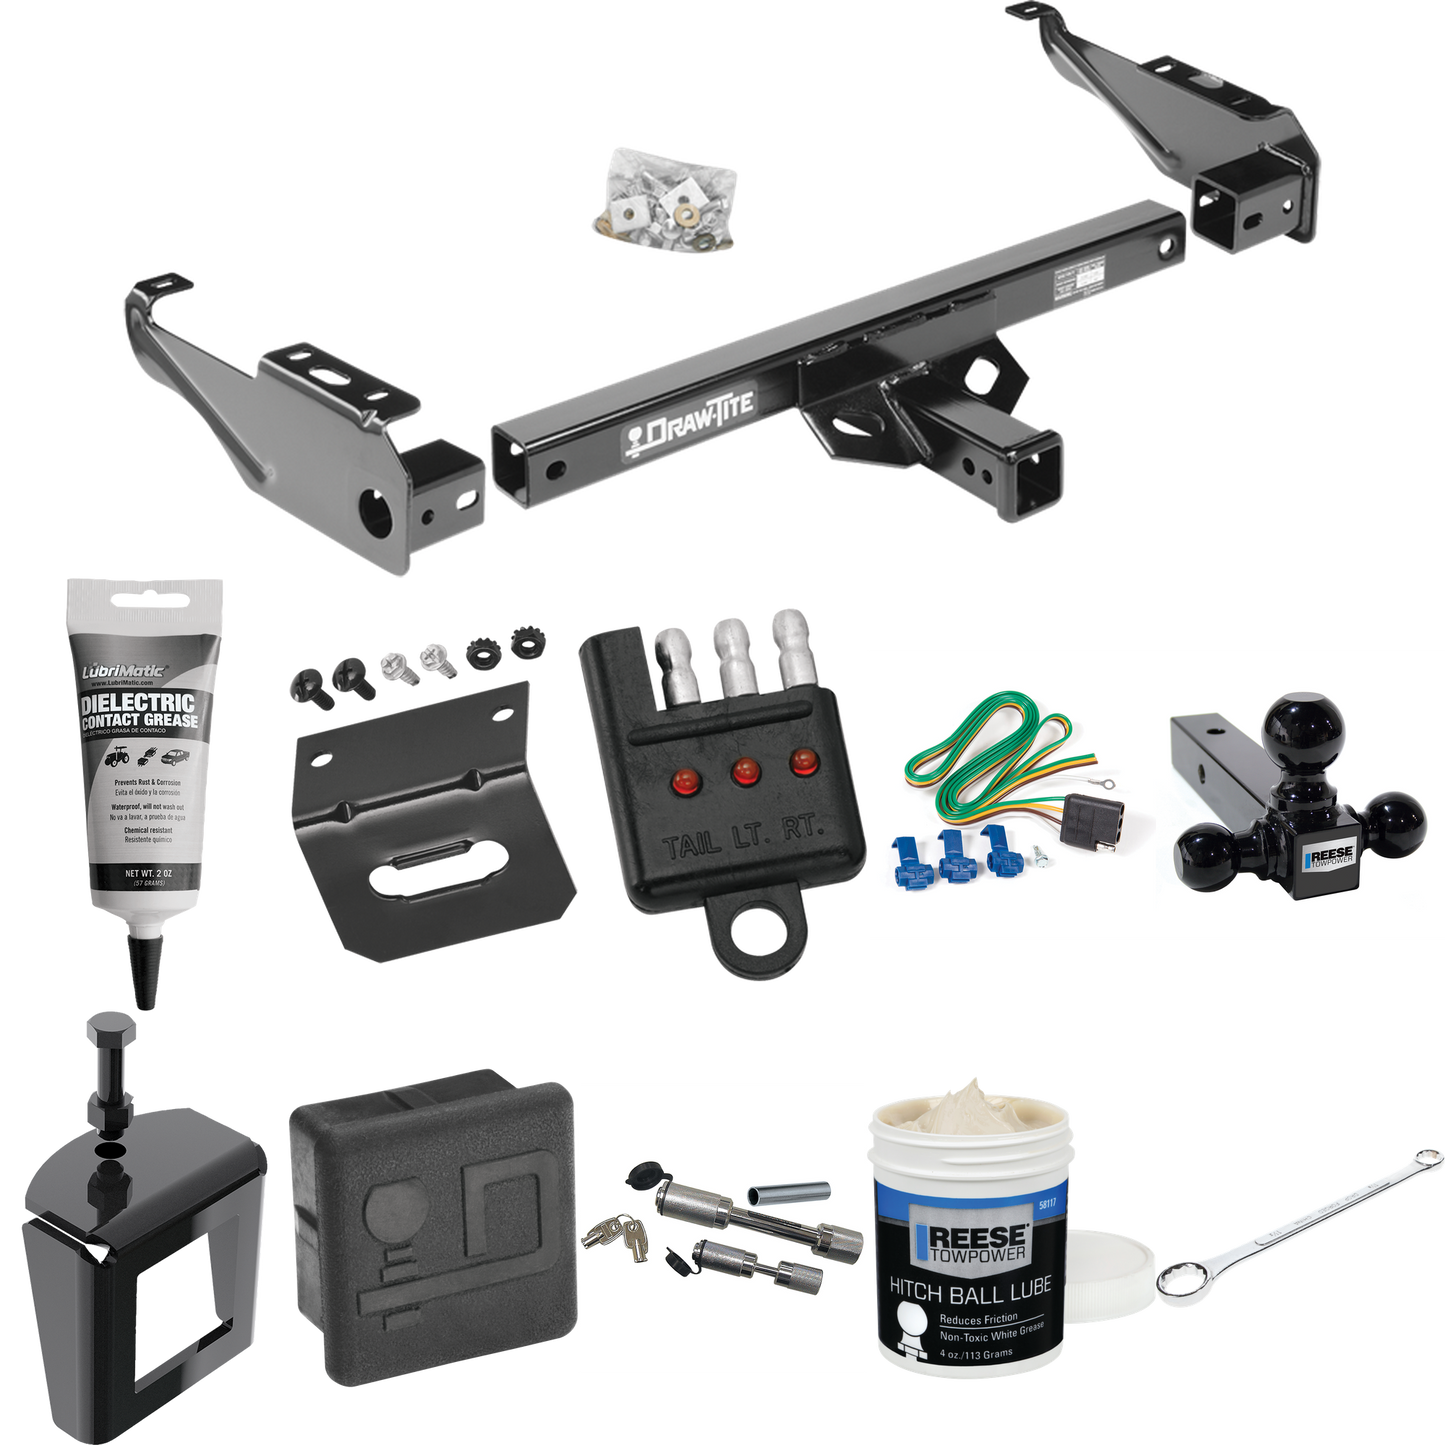 Fits 1963-1965 GMC 1500 Series Trailer Hitch Tow PKG w/ 4-Flat Wiring + Triple Ball Ball Mount 1-7/8" & 2" & 2-5/16" Trailer Balls + Wiring Bracket + Hitch Cover + Dual Hitch & Coupler Locks + Wiring Tester + Ball Lube + Electric Grease + Ball Wrench